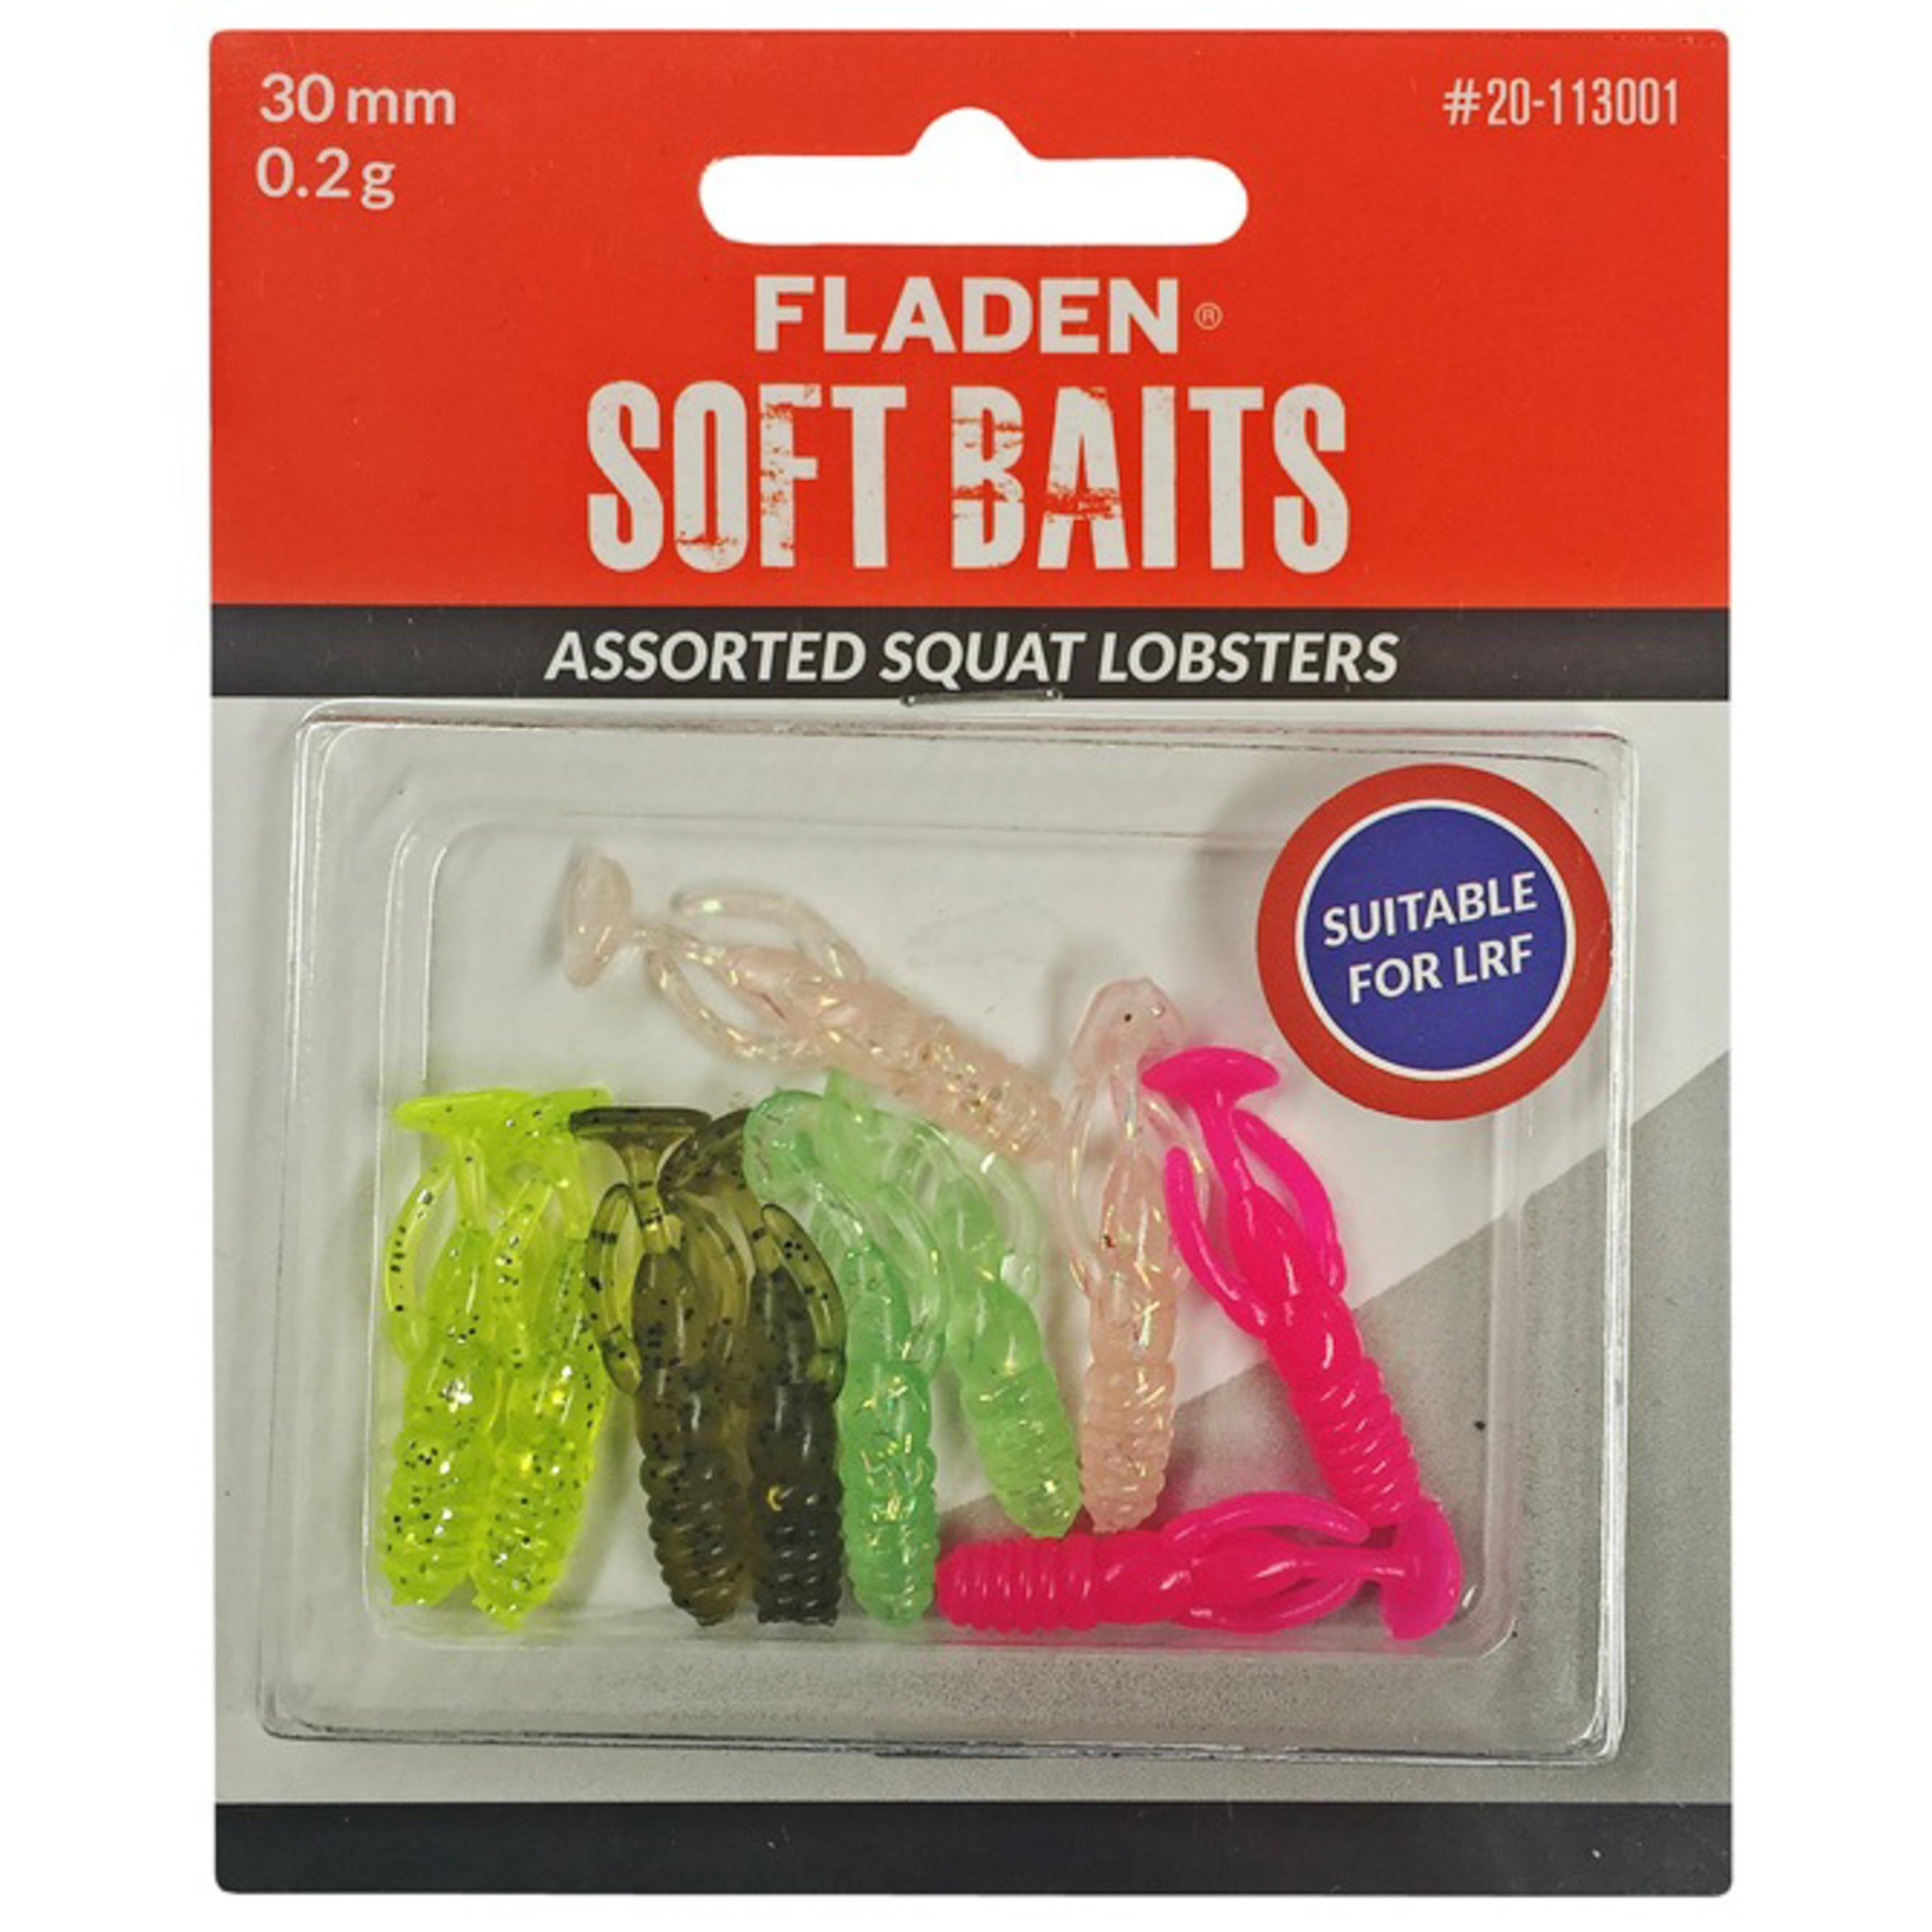 Fladen Fladen Soft Baits Assorted Squat Lobsters 3cm 0 2g 10pk Review